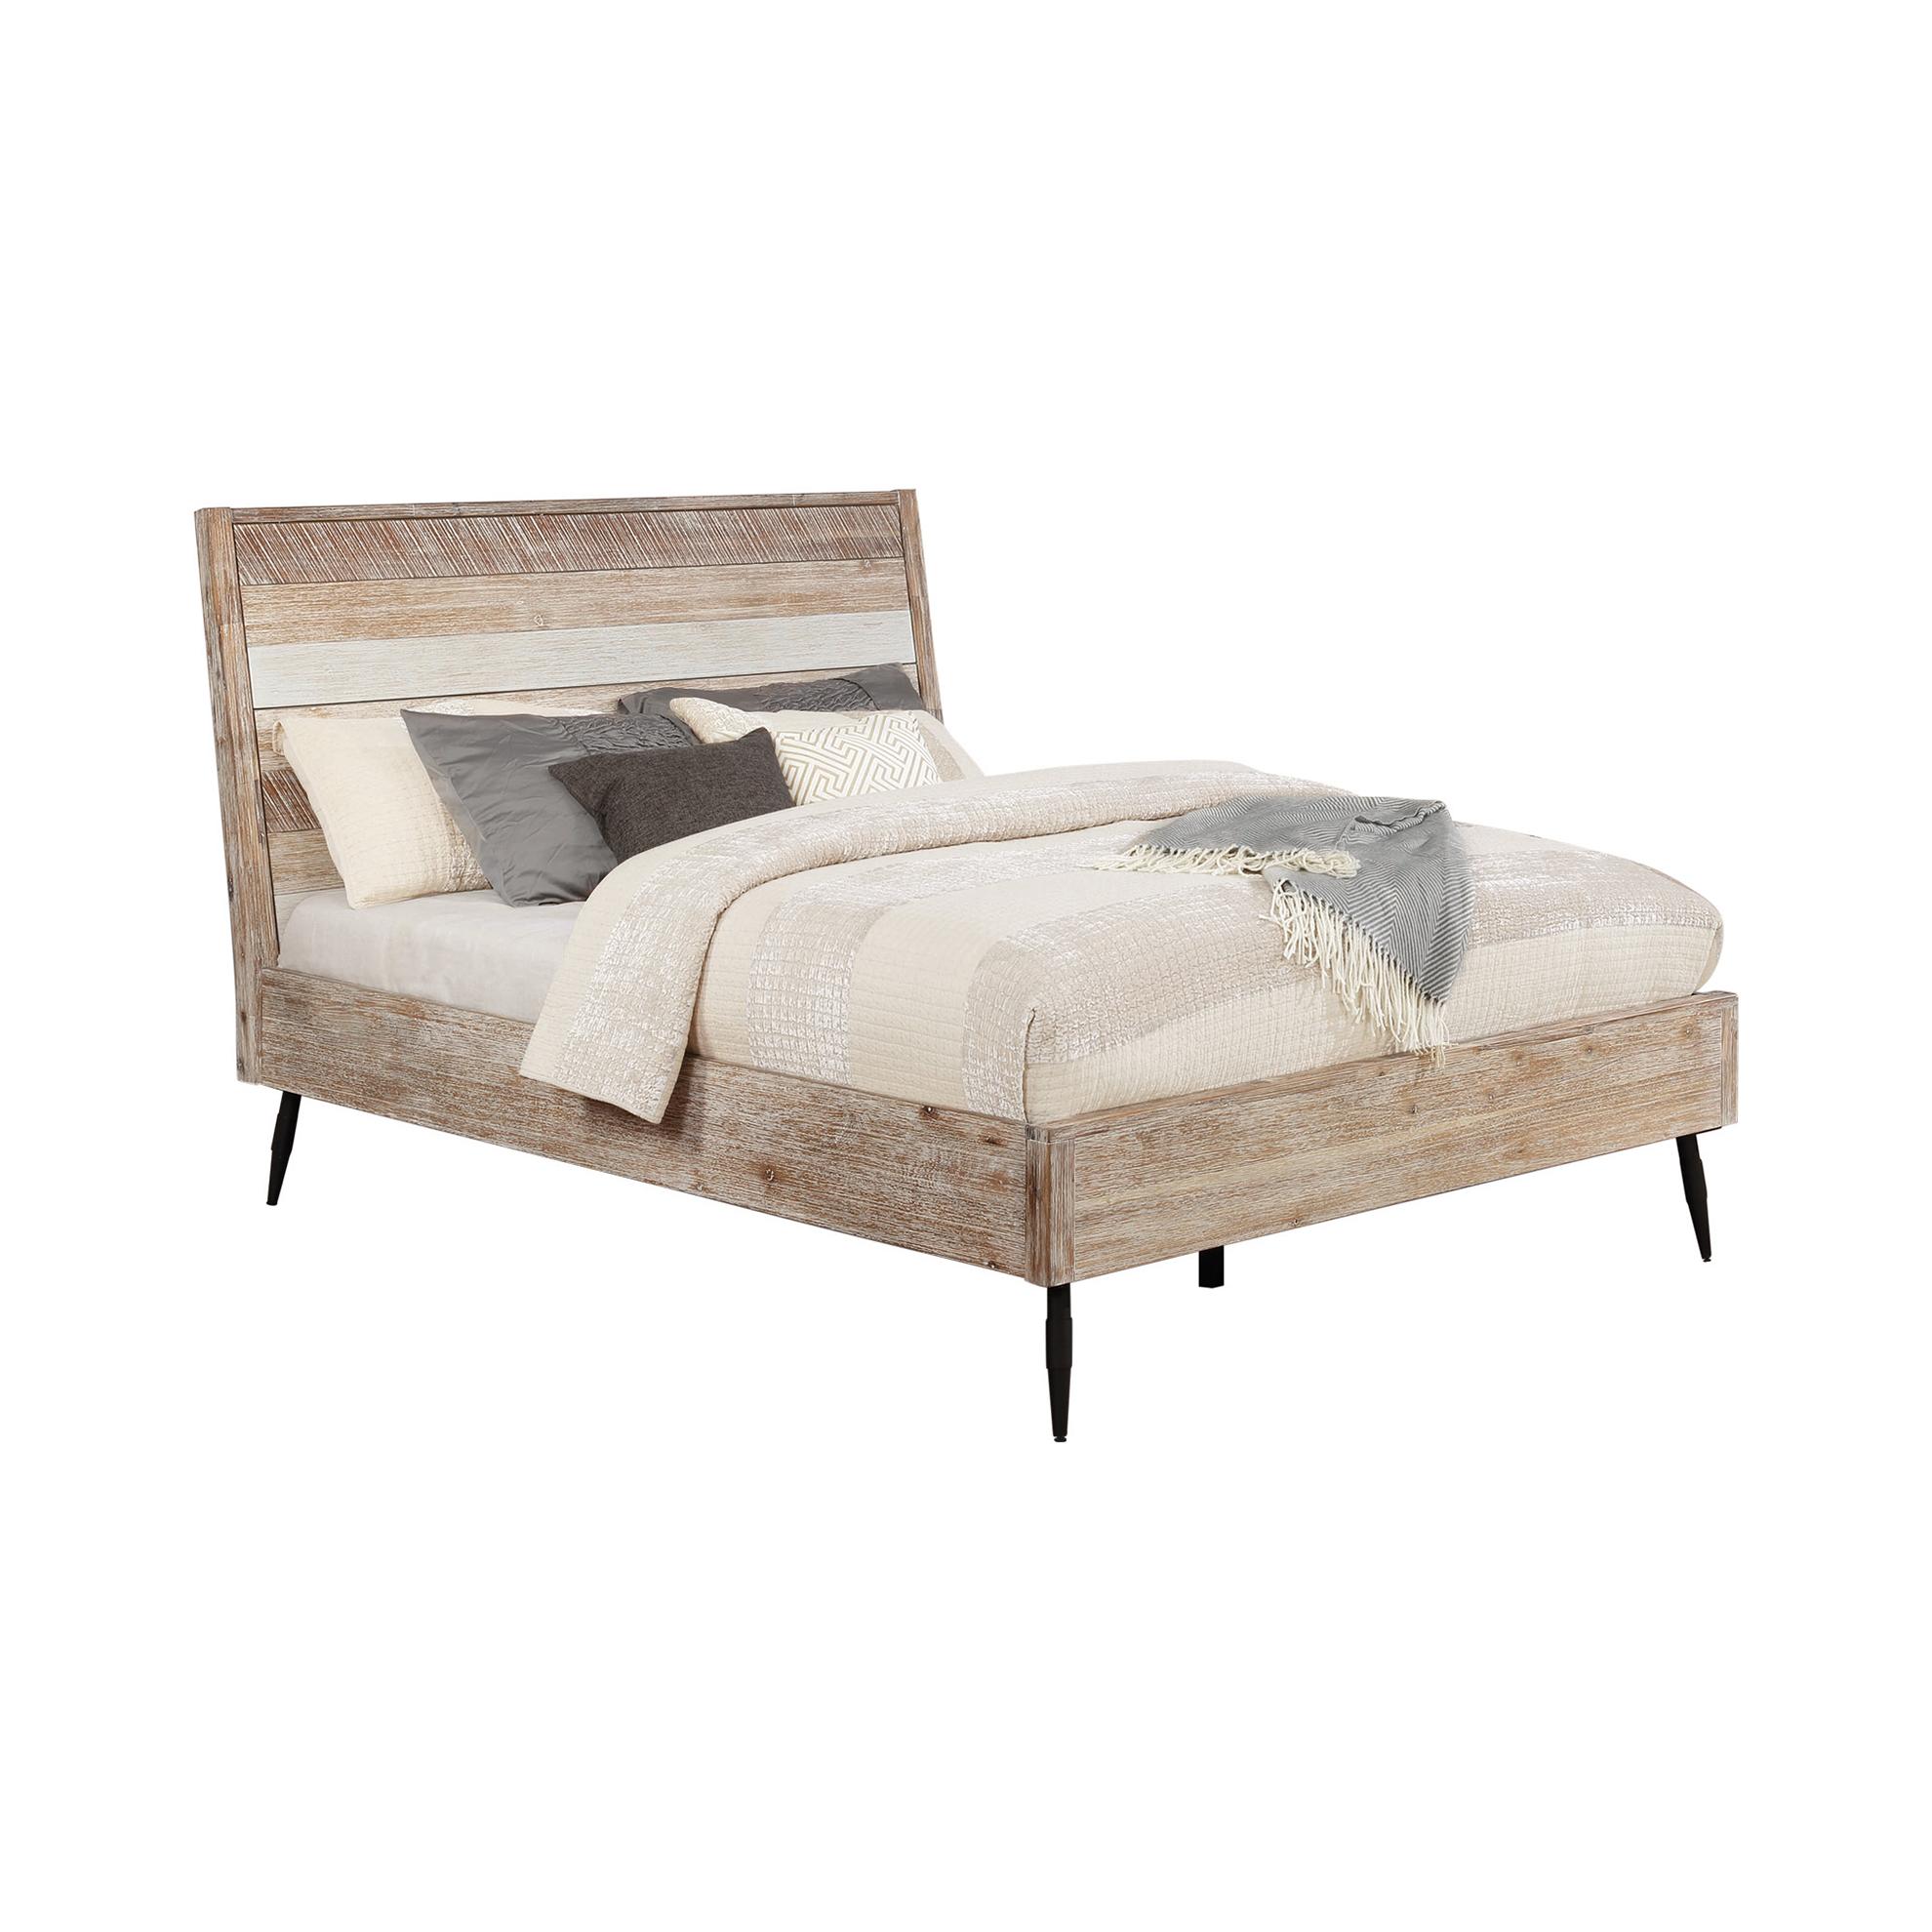 Rustic Bed 215761KW Marlow 215761KW in Natural 